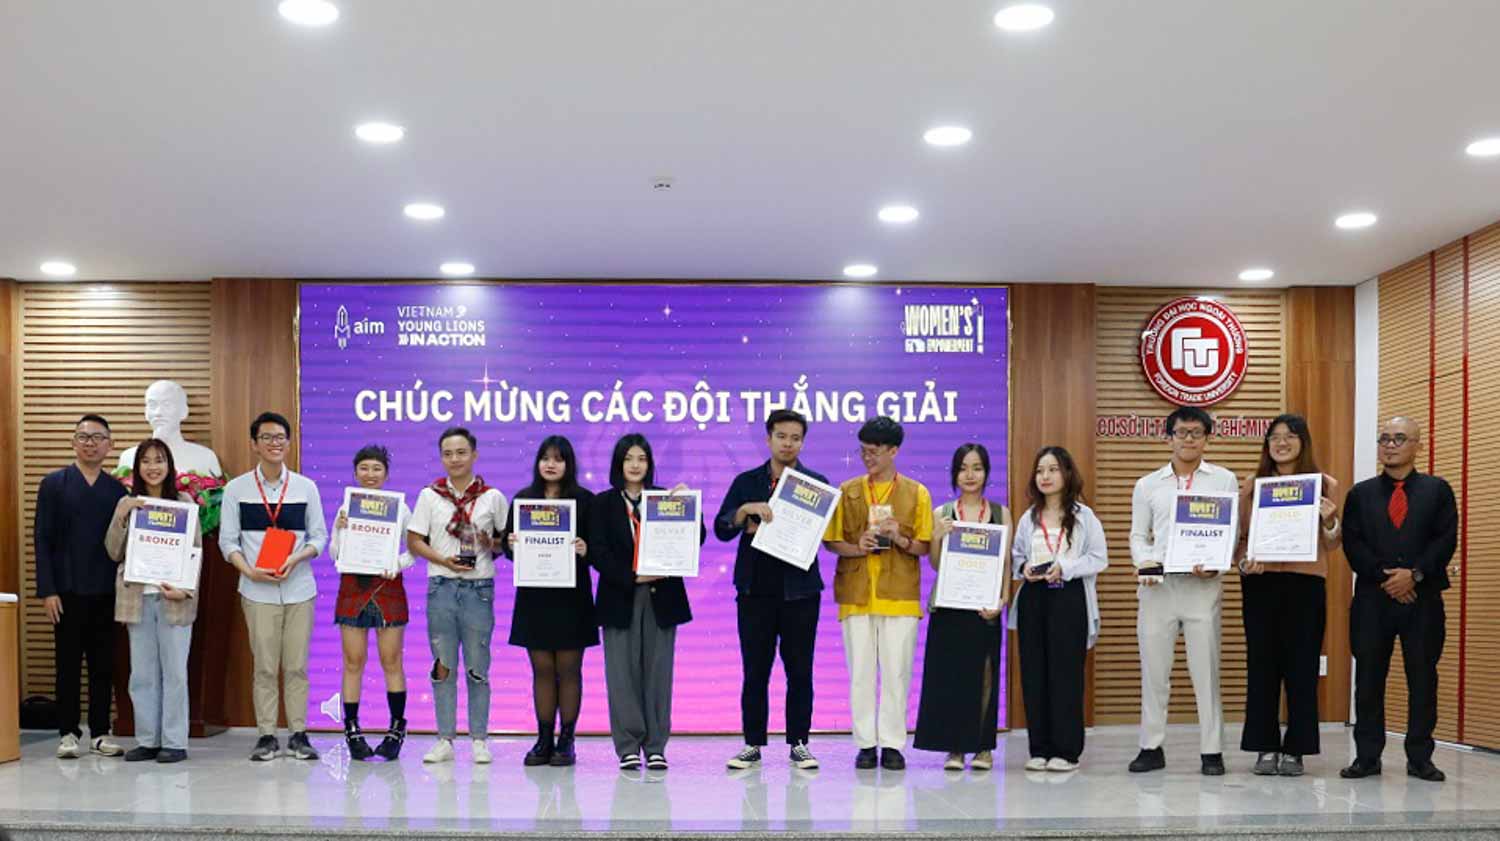 RMIT Vietnam Professional Communication students made up nine of the ten finalist team members in the Student league. (Photo: AIM Academy)